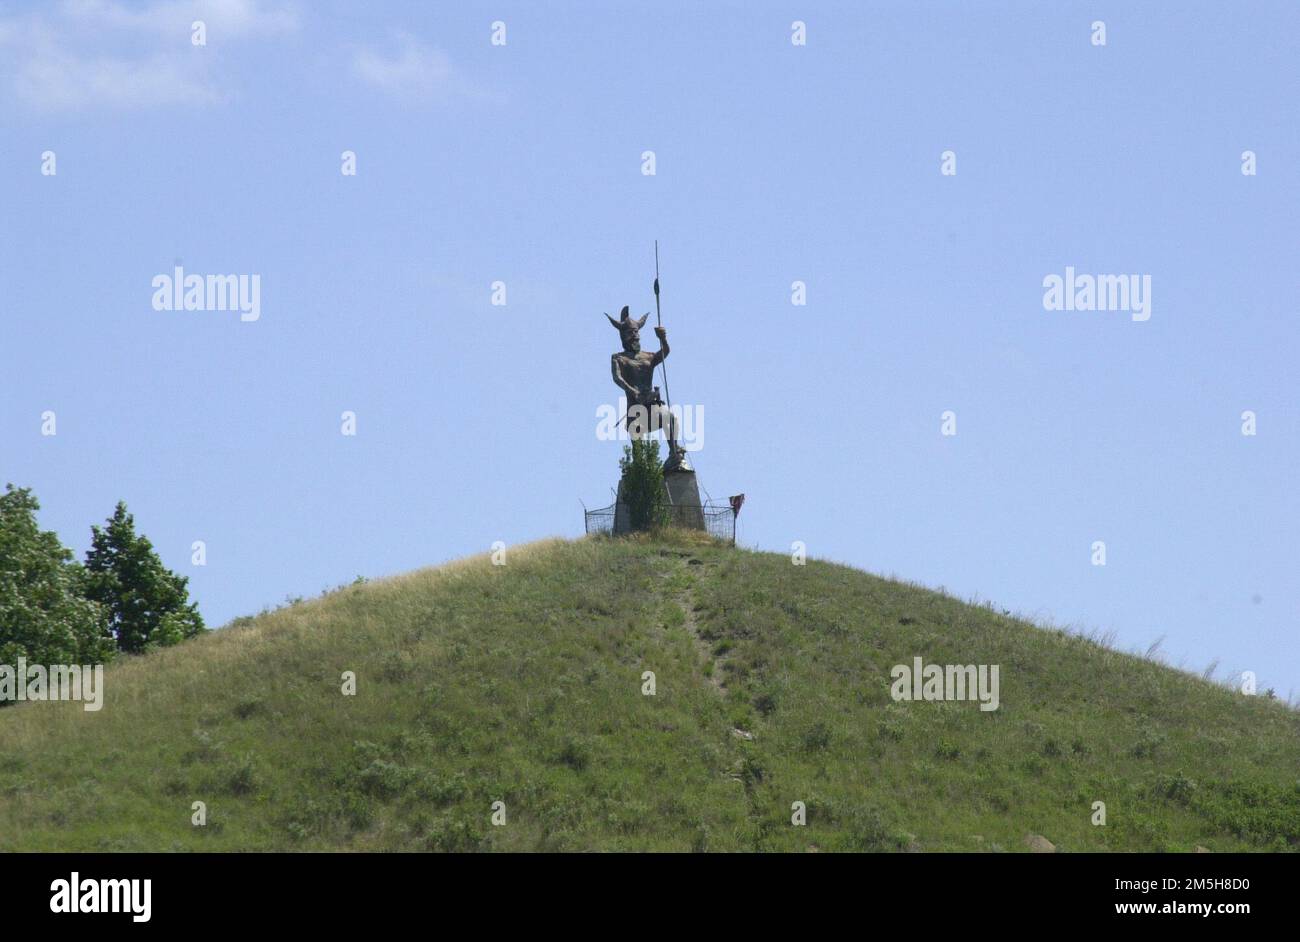 Sheyenne River Valley Scenic Byway - Viking Warrior atop Pyramid Hill. A statue of a Viking warrior stands on top of Pyramid Hill as a monument to the predominently Scandinavian ancestry of those who settled this region at the turn of the 20th Century. Location: Fort Ransom, North Dakota (46.520° N 97.938° W) Stock Photo